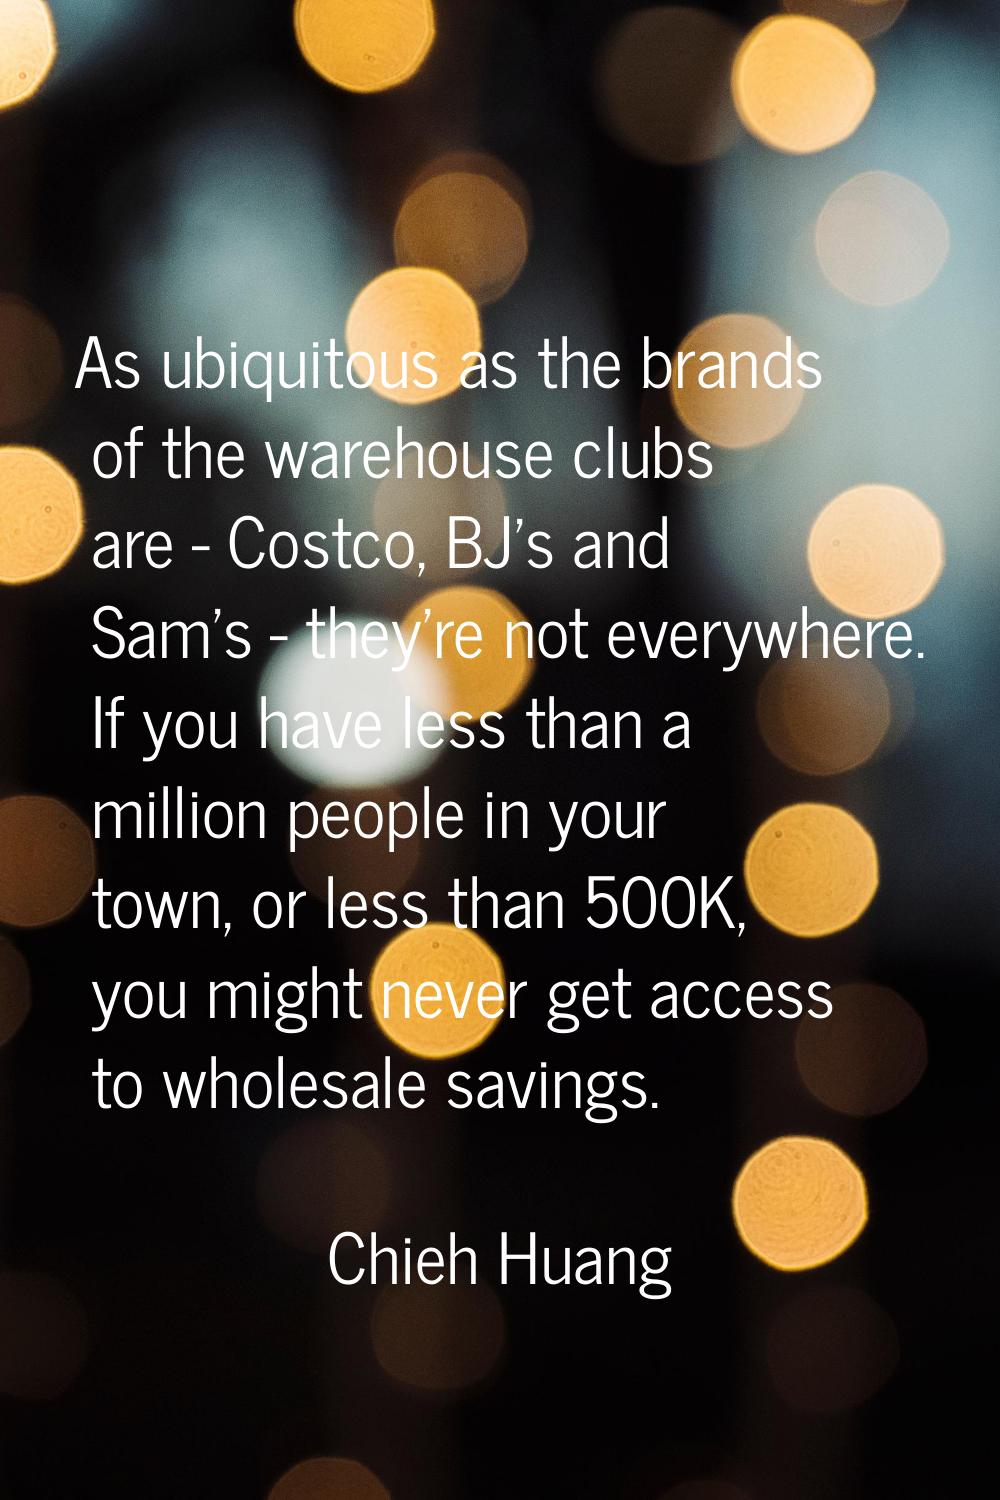 As ubiquitous as the brands of the warehouse clubs are - Costco, BJ's and Sam's - they're not every